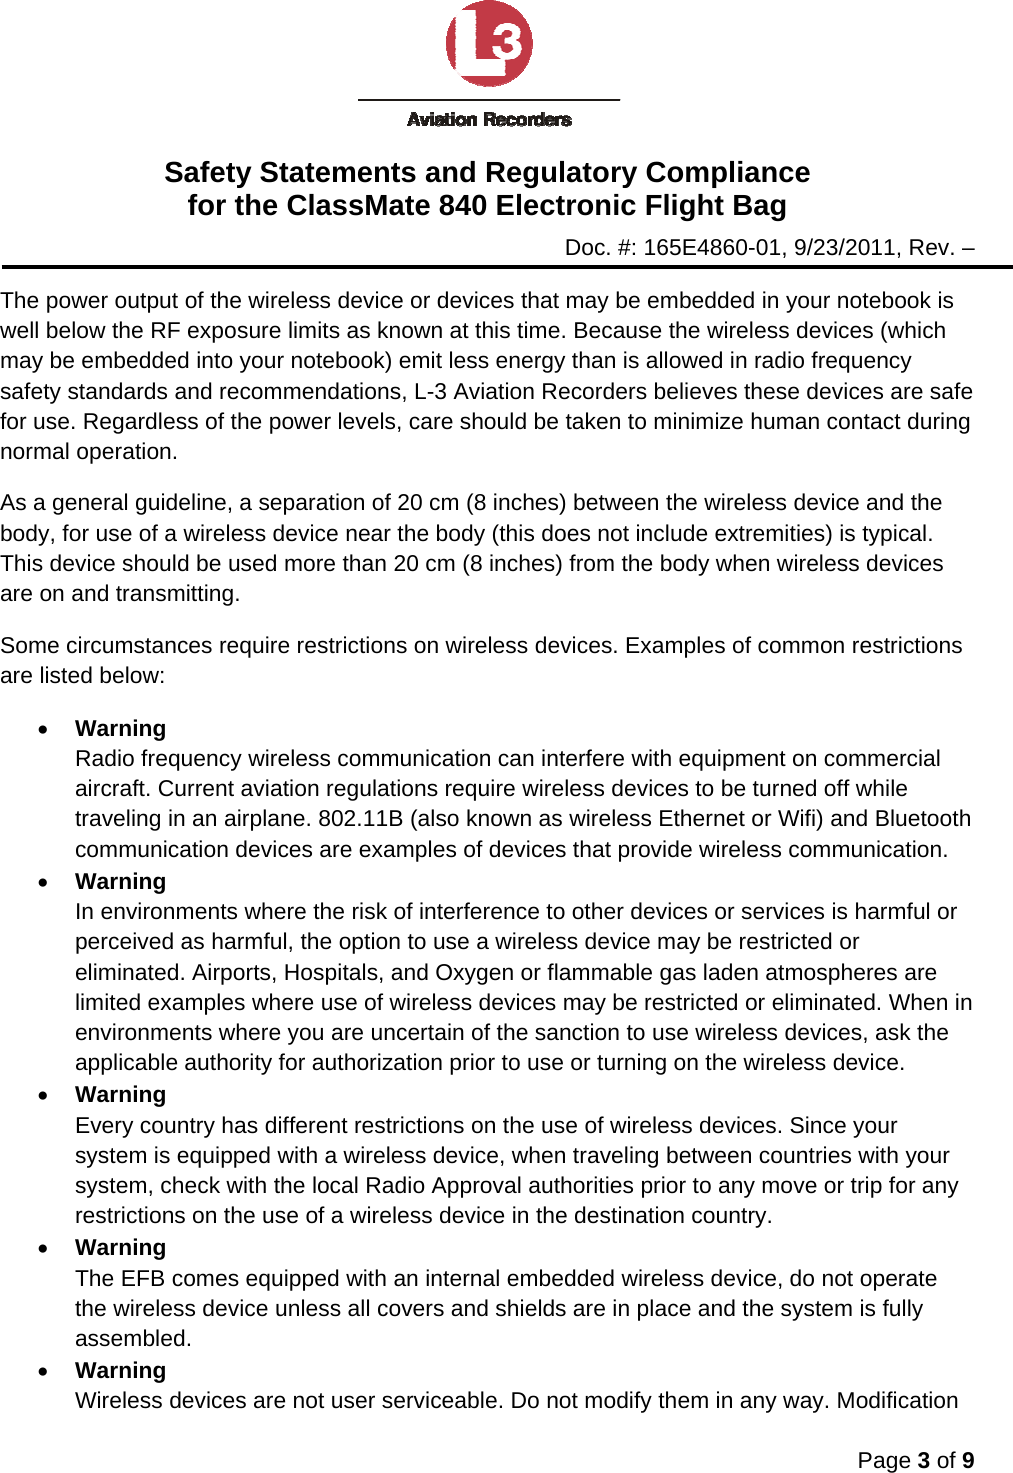 Safety Statements and Regulatory Compliance for the ClassMate 840 Electronic Flight Bag Doc. #: 165E4860-01, 9/23/2011, Rev. –  Page 3 of 9  The power output of the wireless device or devices that may be embedded in your notebook is well below the RF exposure limits as known at this time. Because the wireless devices (which may be embedded into your notebook) emit less energy than is allowed in radio frequency safety standards and recommendations, L-3 Aviation Recorders believes these devices are safe for use. Regardless of the power levels, care should be taken to minimize human contact during normal operation. As a general guideline, a separation of 20 cm (8 inches) between the wireless device and the body, for use of a wireless device near the body (this does not include extremities) is typical. This device should be used more than 20 cm (8 inches) from the body when wireless devices are on and transmitting. Some circumstances require restrictions on wireless devices. Examples of common restrictions are listed below: • Warning Radio frequency wireless communication can interfere with equipment on commercial aircraft. Current aviation regulations require wireless devices to be turned off while traveling in an airplane. 802.11B (also known as wireless Ethernet or Wifi) and Bluetooth communication devices are examples of devices that provide wireless communication. • Warning In environments where the risk of interference to other devices or services is harmful or perceived as harmful, the option to use a wireless device may be restricted or eliminated. Airports, Hospitals, and Oxygen or flammable gas laden atmospheres are limited examples where use of wireless devices may be restricted or eliminated. When in environments where you are uncertain of the sanction to use wireless devices, ask the applicable authority for authorization prior to use or turning on the wireless device. • Warning Every country has different restrictions on the use of wireless devices. Since your system is equipped with a wireless device, when traveling between countries with your system, check with the local Radio Approval authorities prior to any move or trip for any restrictions on the use of a wireless device in the destination country. • Warning The EFB comes equipped with an internal embedded wireless device, do not operate the wireless device unless all covers and shields are in place and the system is fully assembled. • Warning Wireless devices are not user serviceable. Do not modify them in any way. Modification 